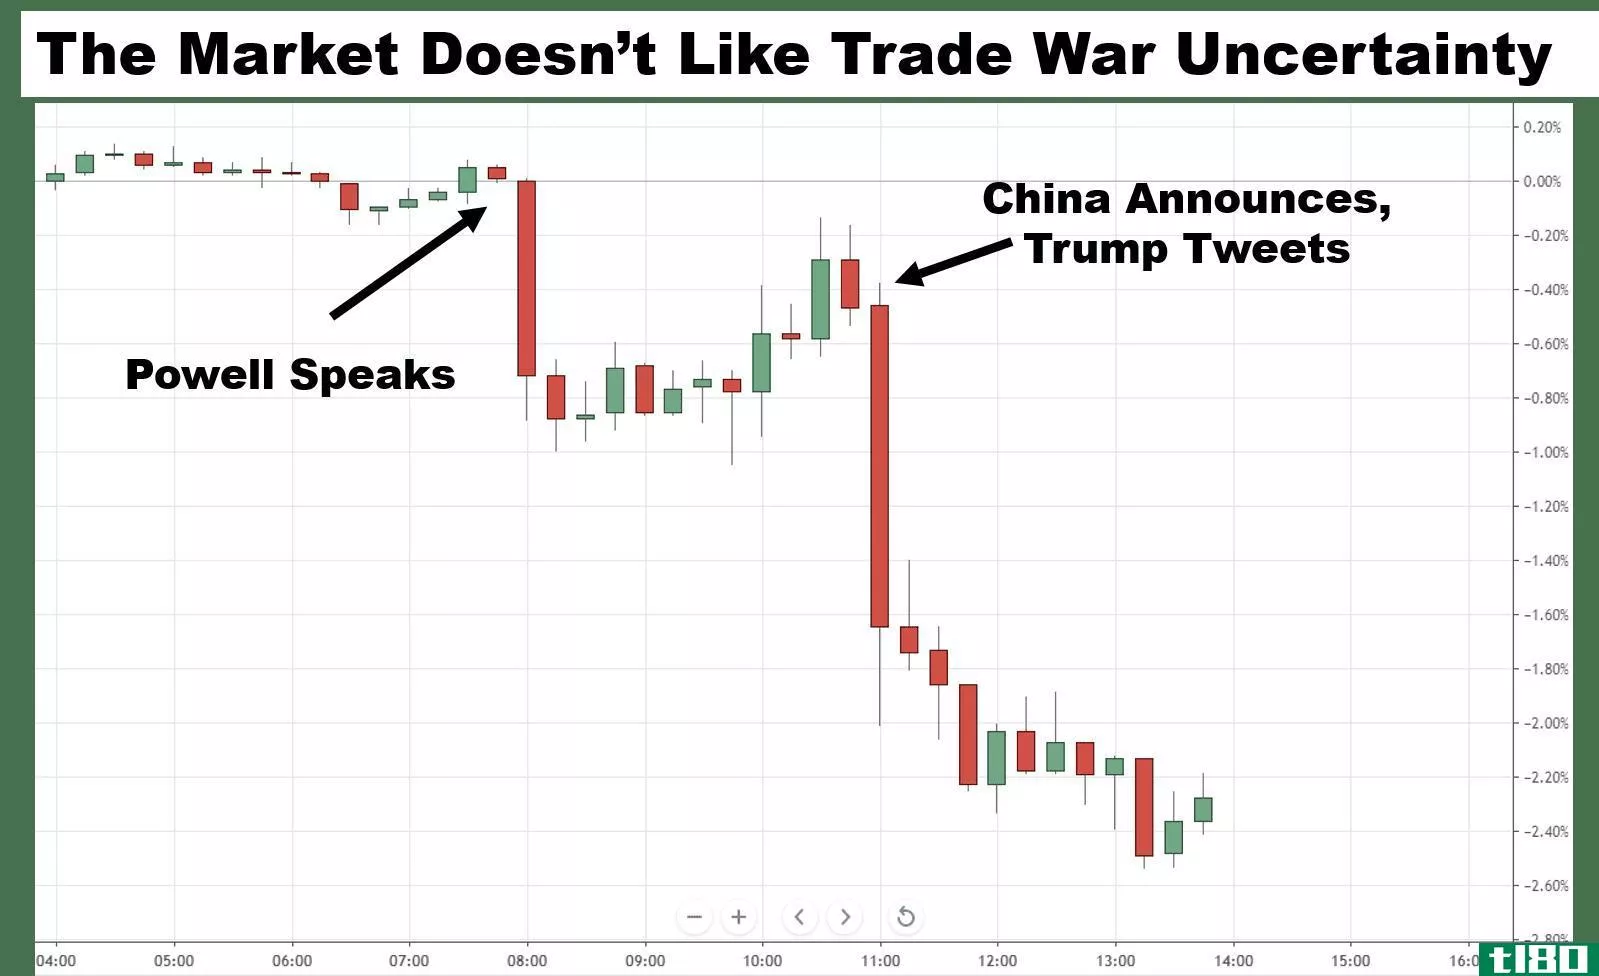 15-minute chart showing the reaction of the markets to trade war uncertainty